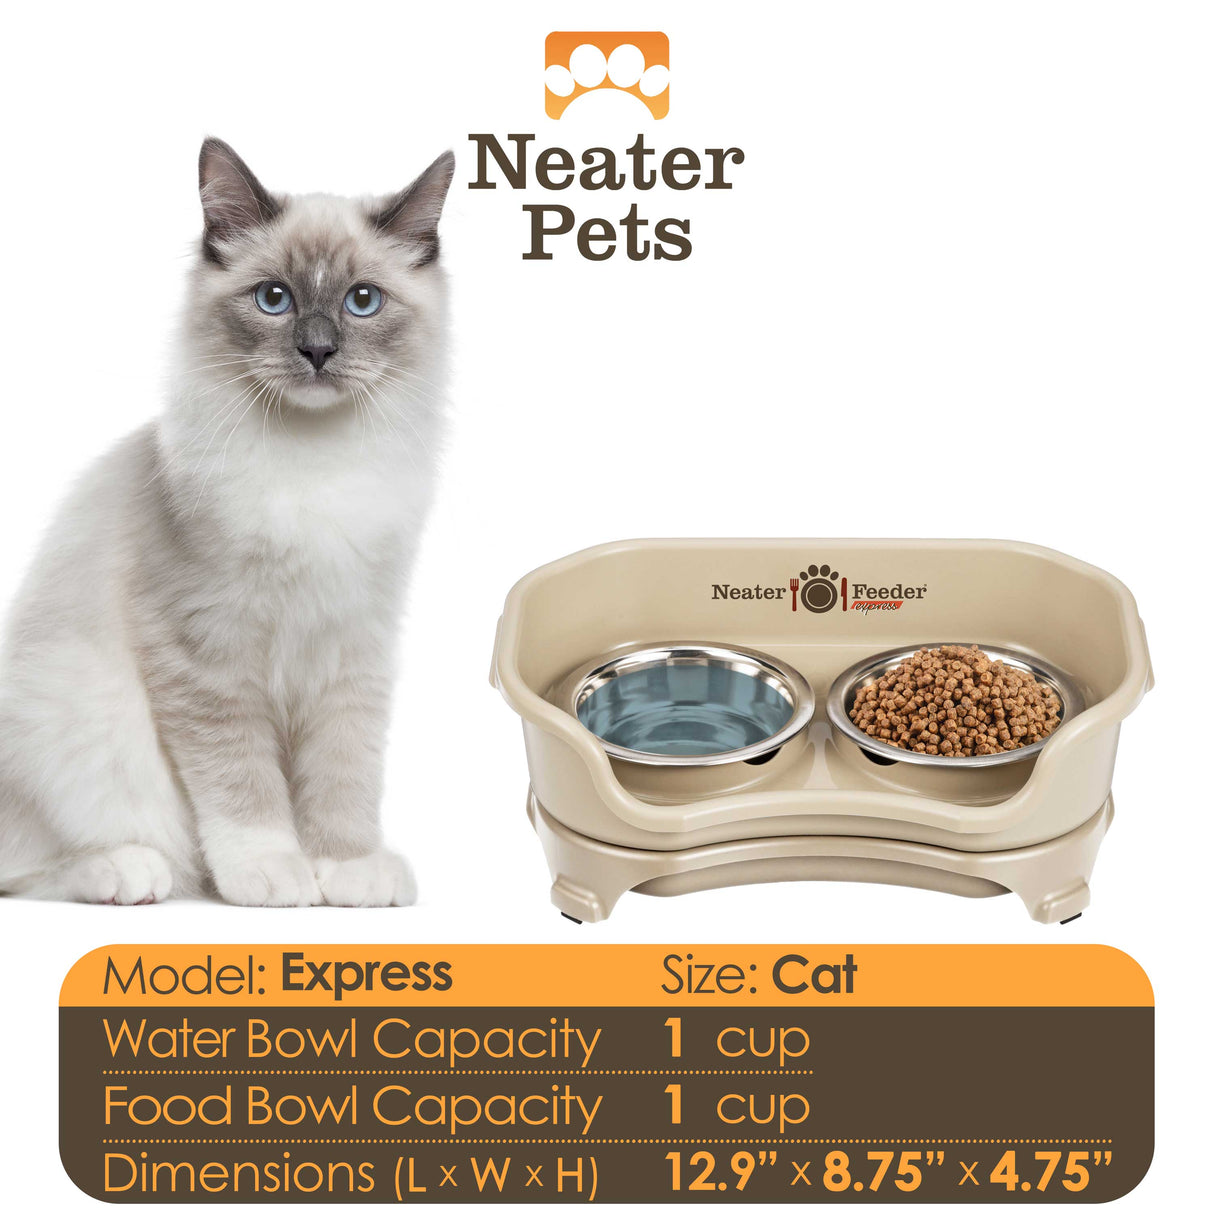 Almond Express Cat feeder bowl capacity and dimensions